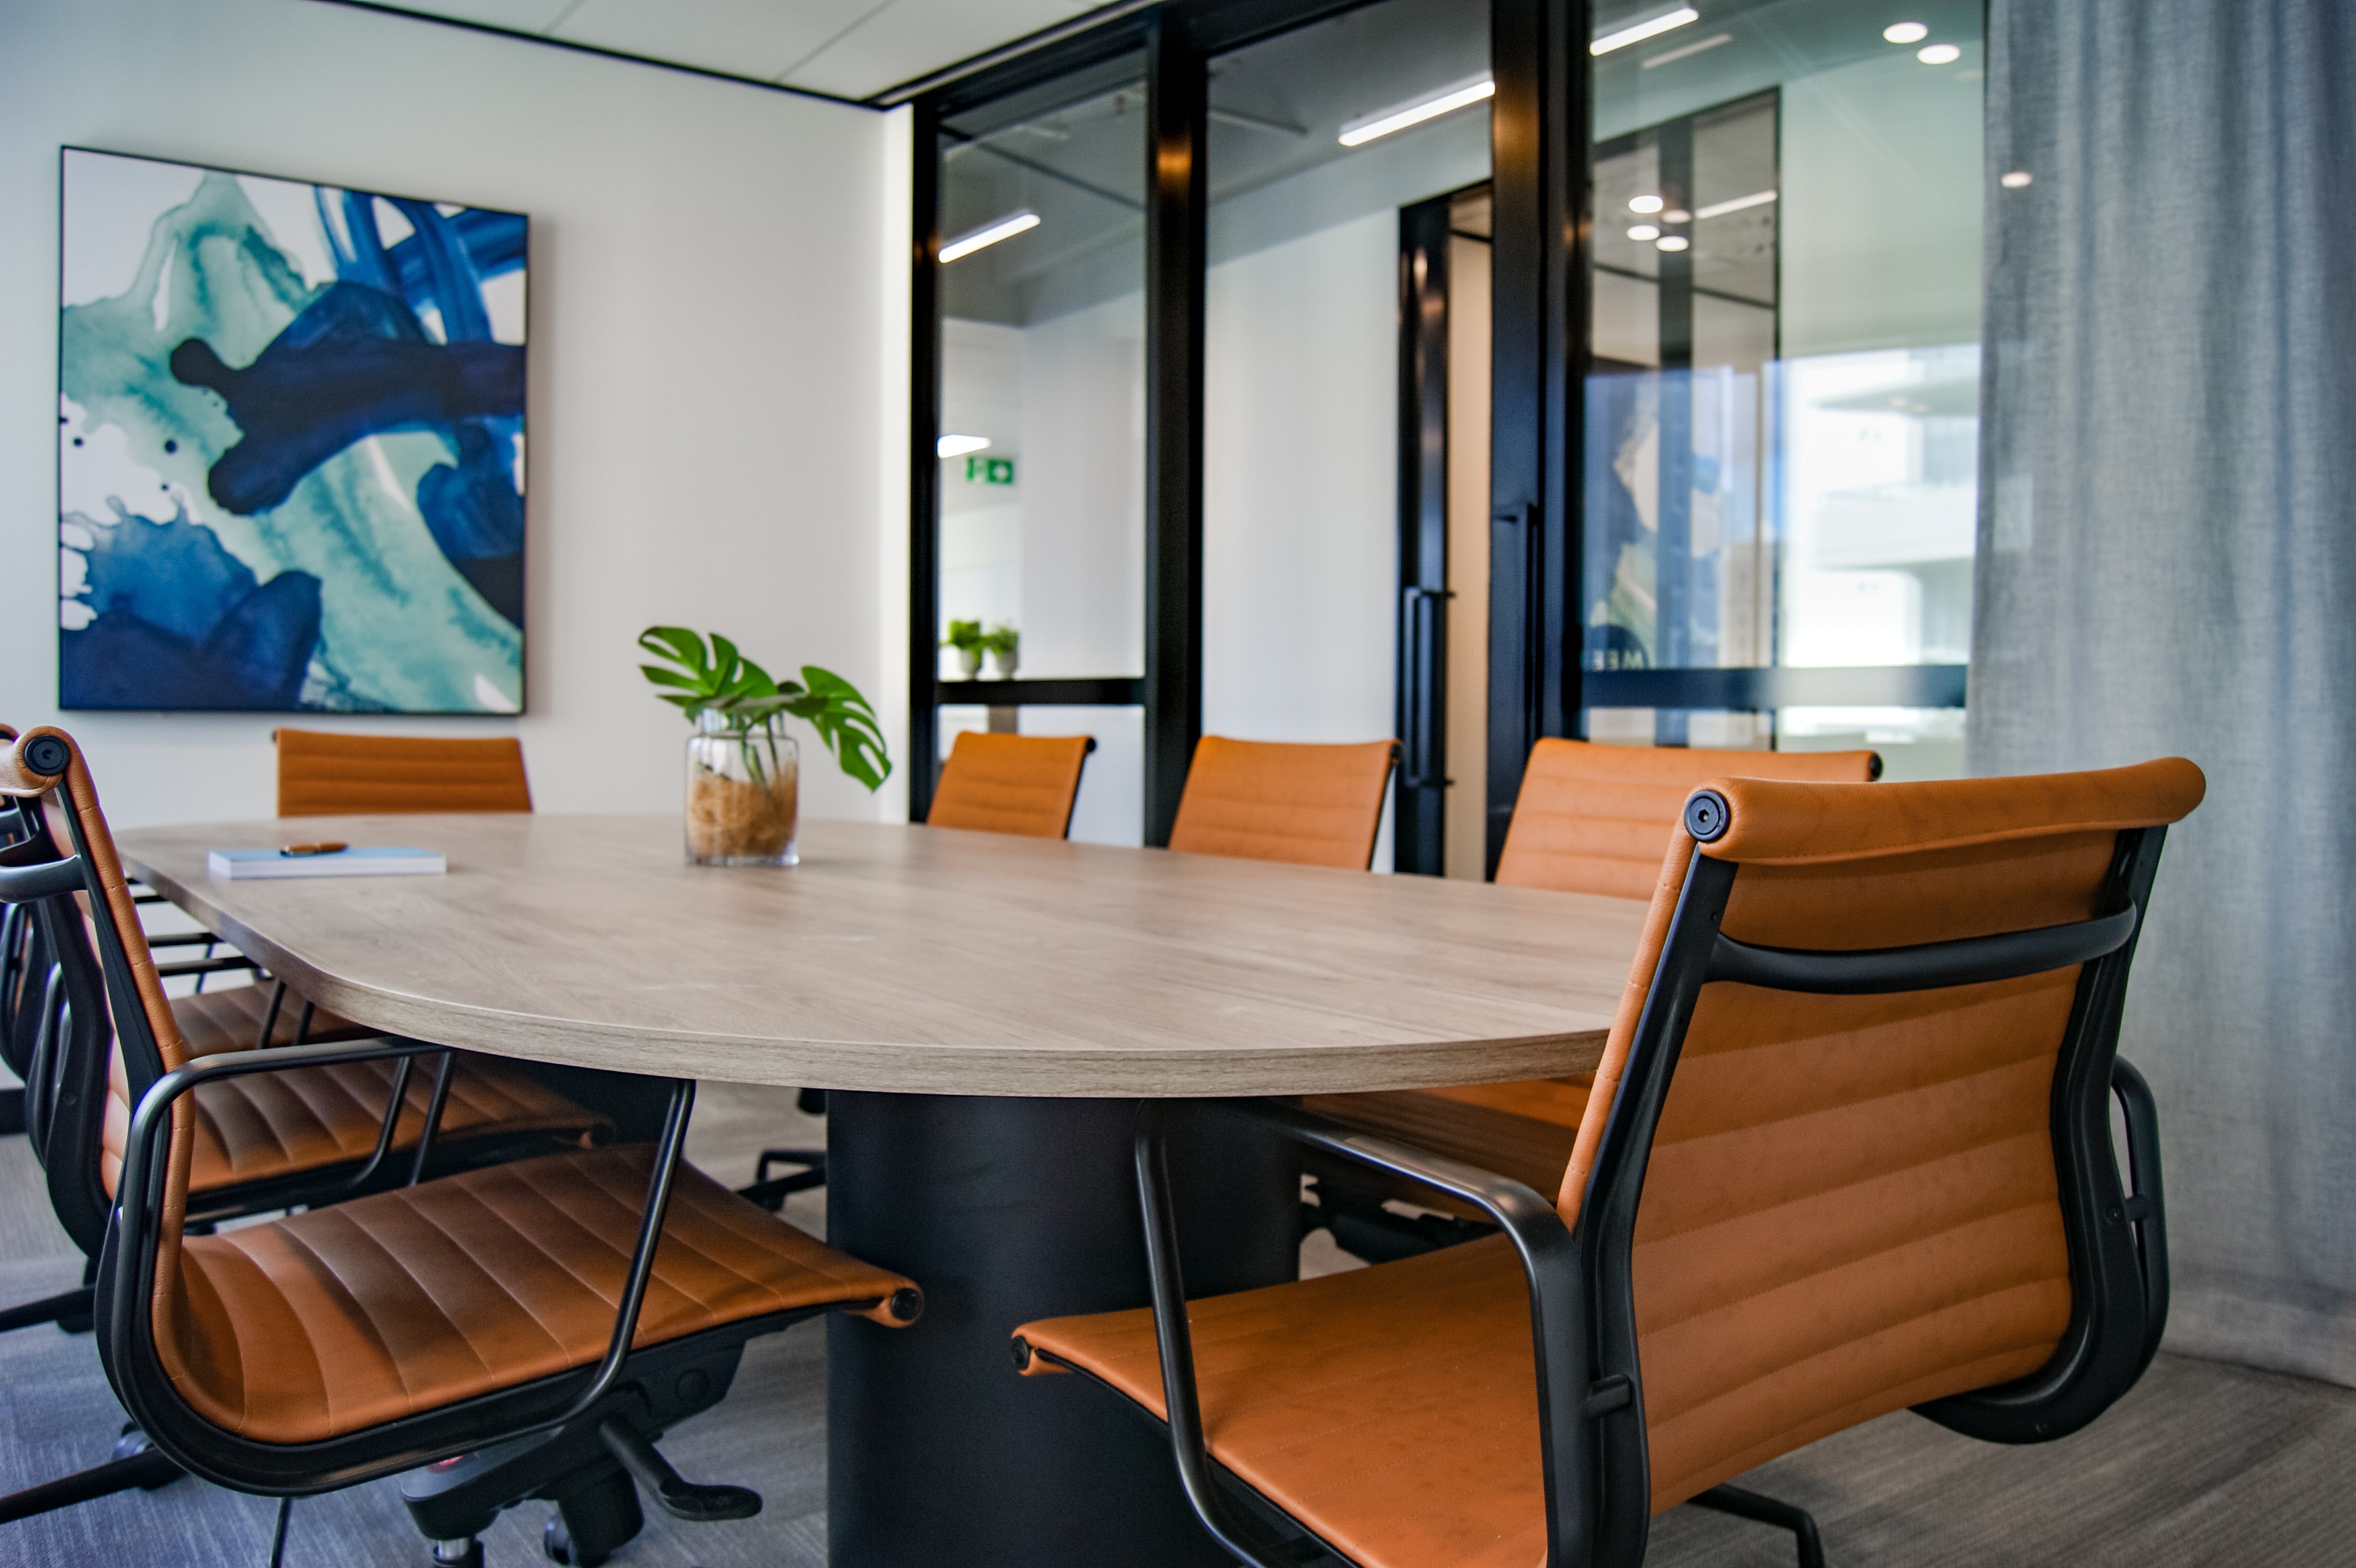 What to Consider When Looking For Office Furniture for Sale?